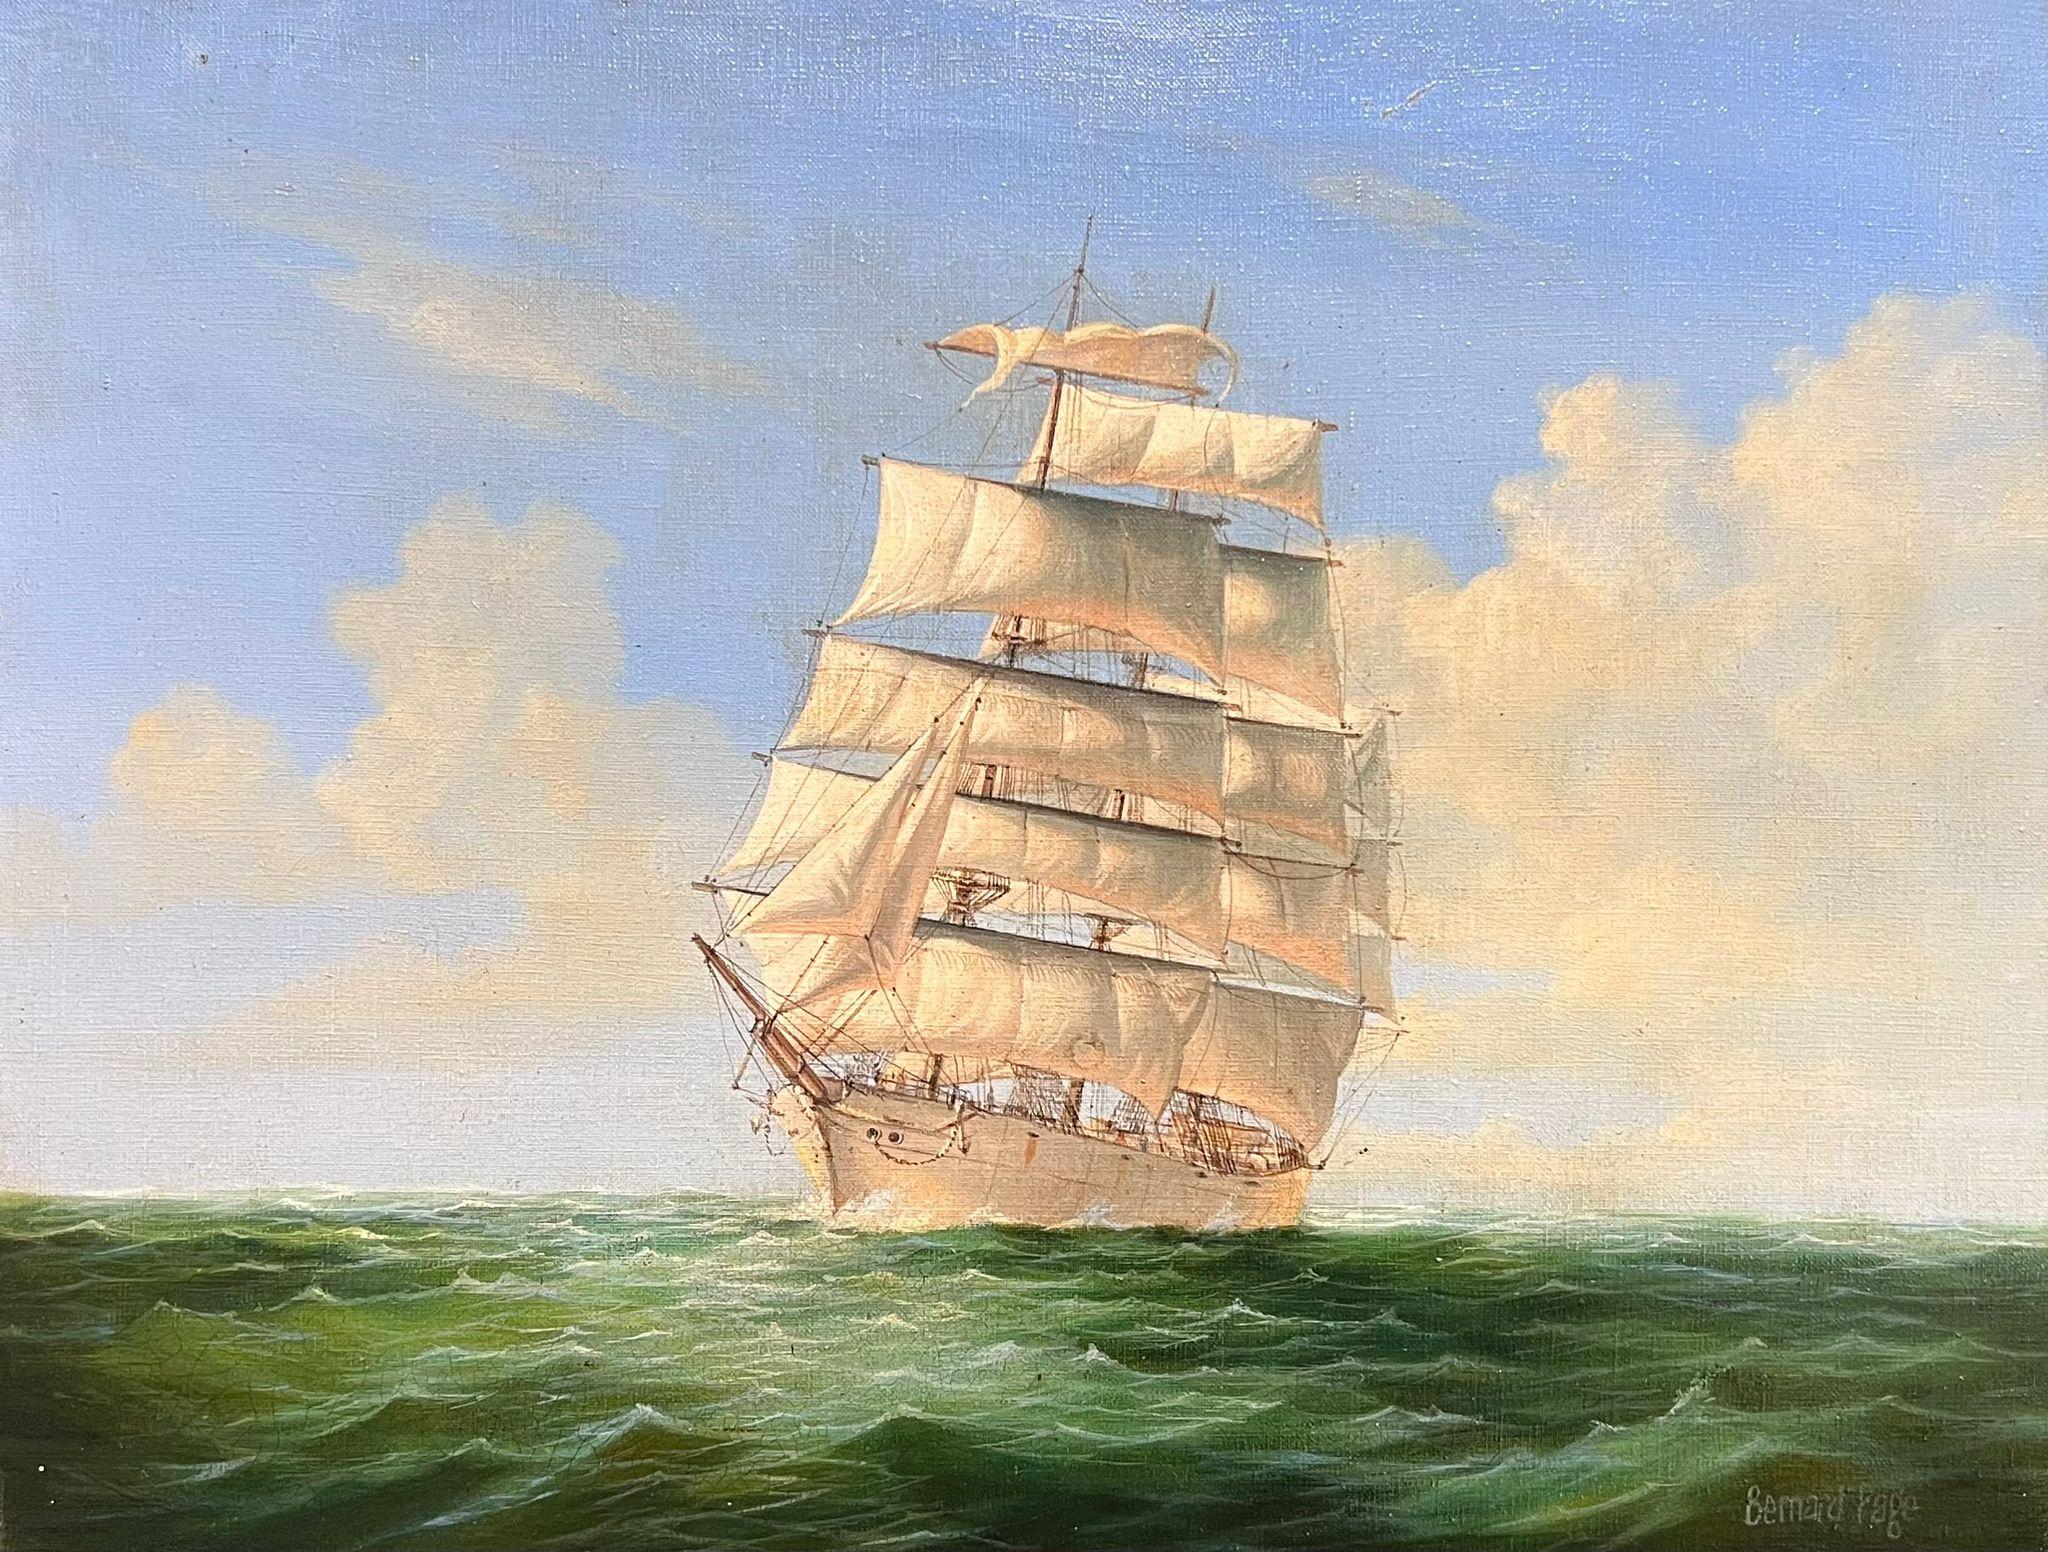 Sailing on the High Seas
by Bernard Page (20th century British artist)
signed oil on canvas, framed
framed: 18 x 21.5 inches
canvas: 14 x 18 inches
provenance: private collection, UK
condition: very good and sound condition